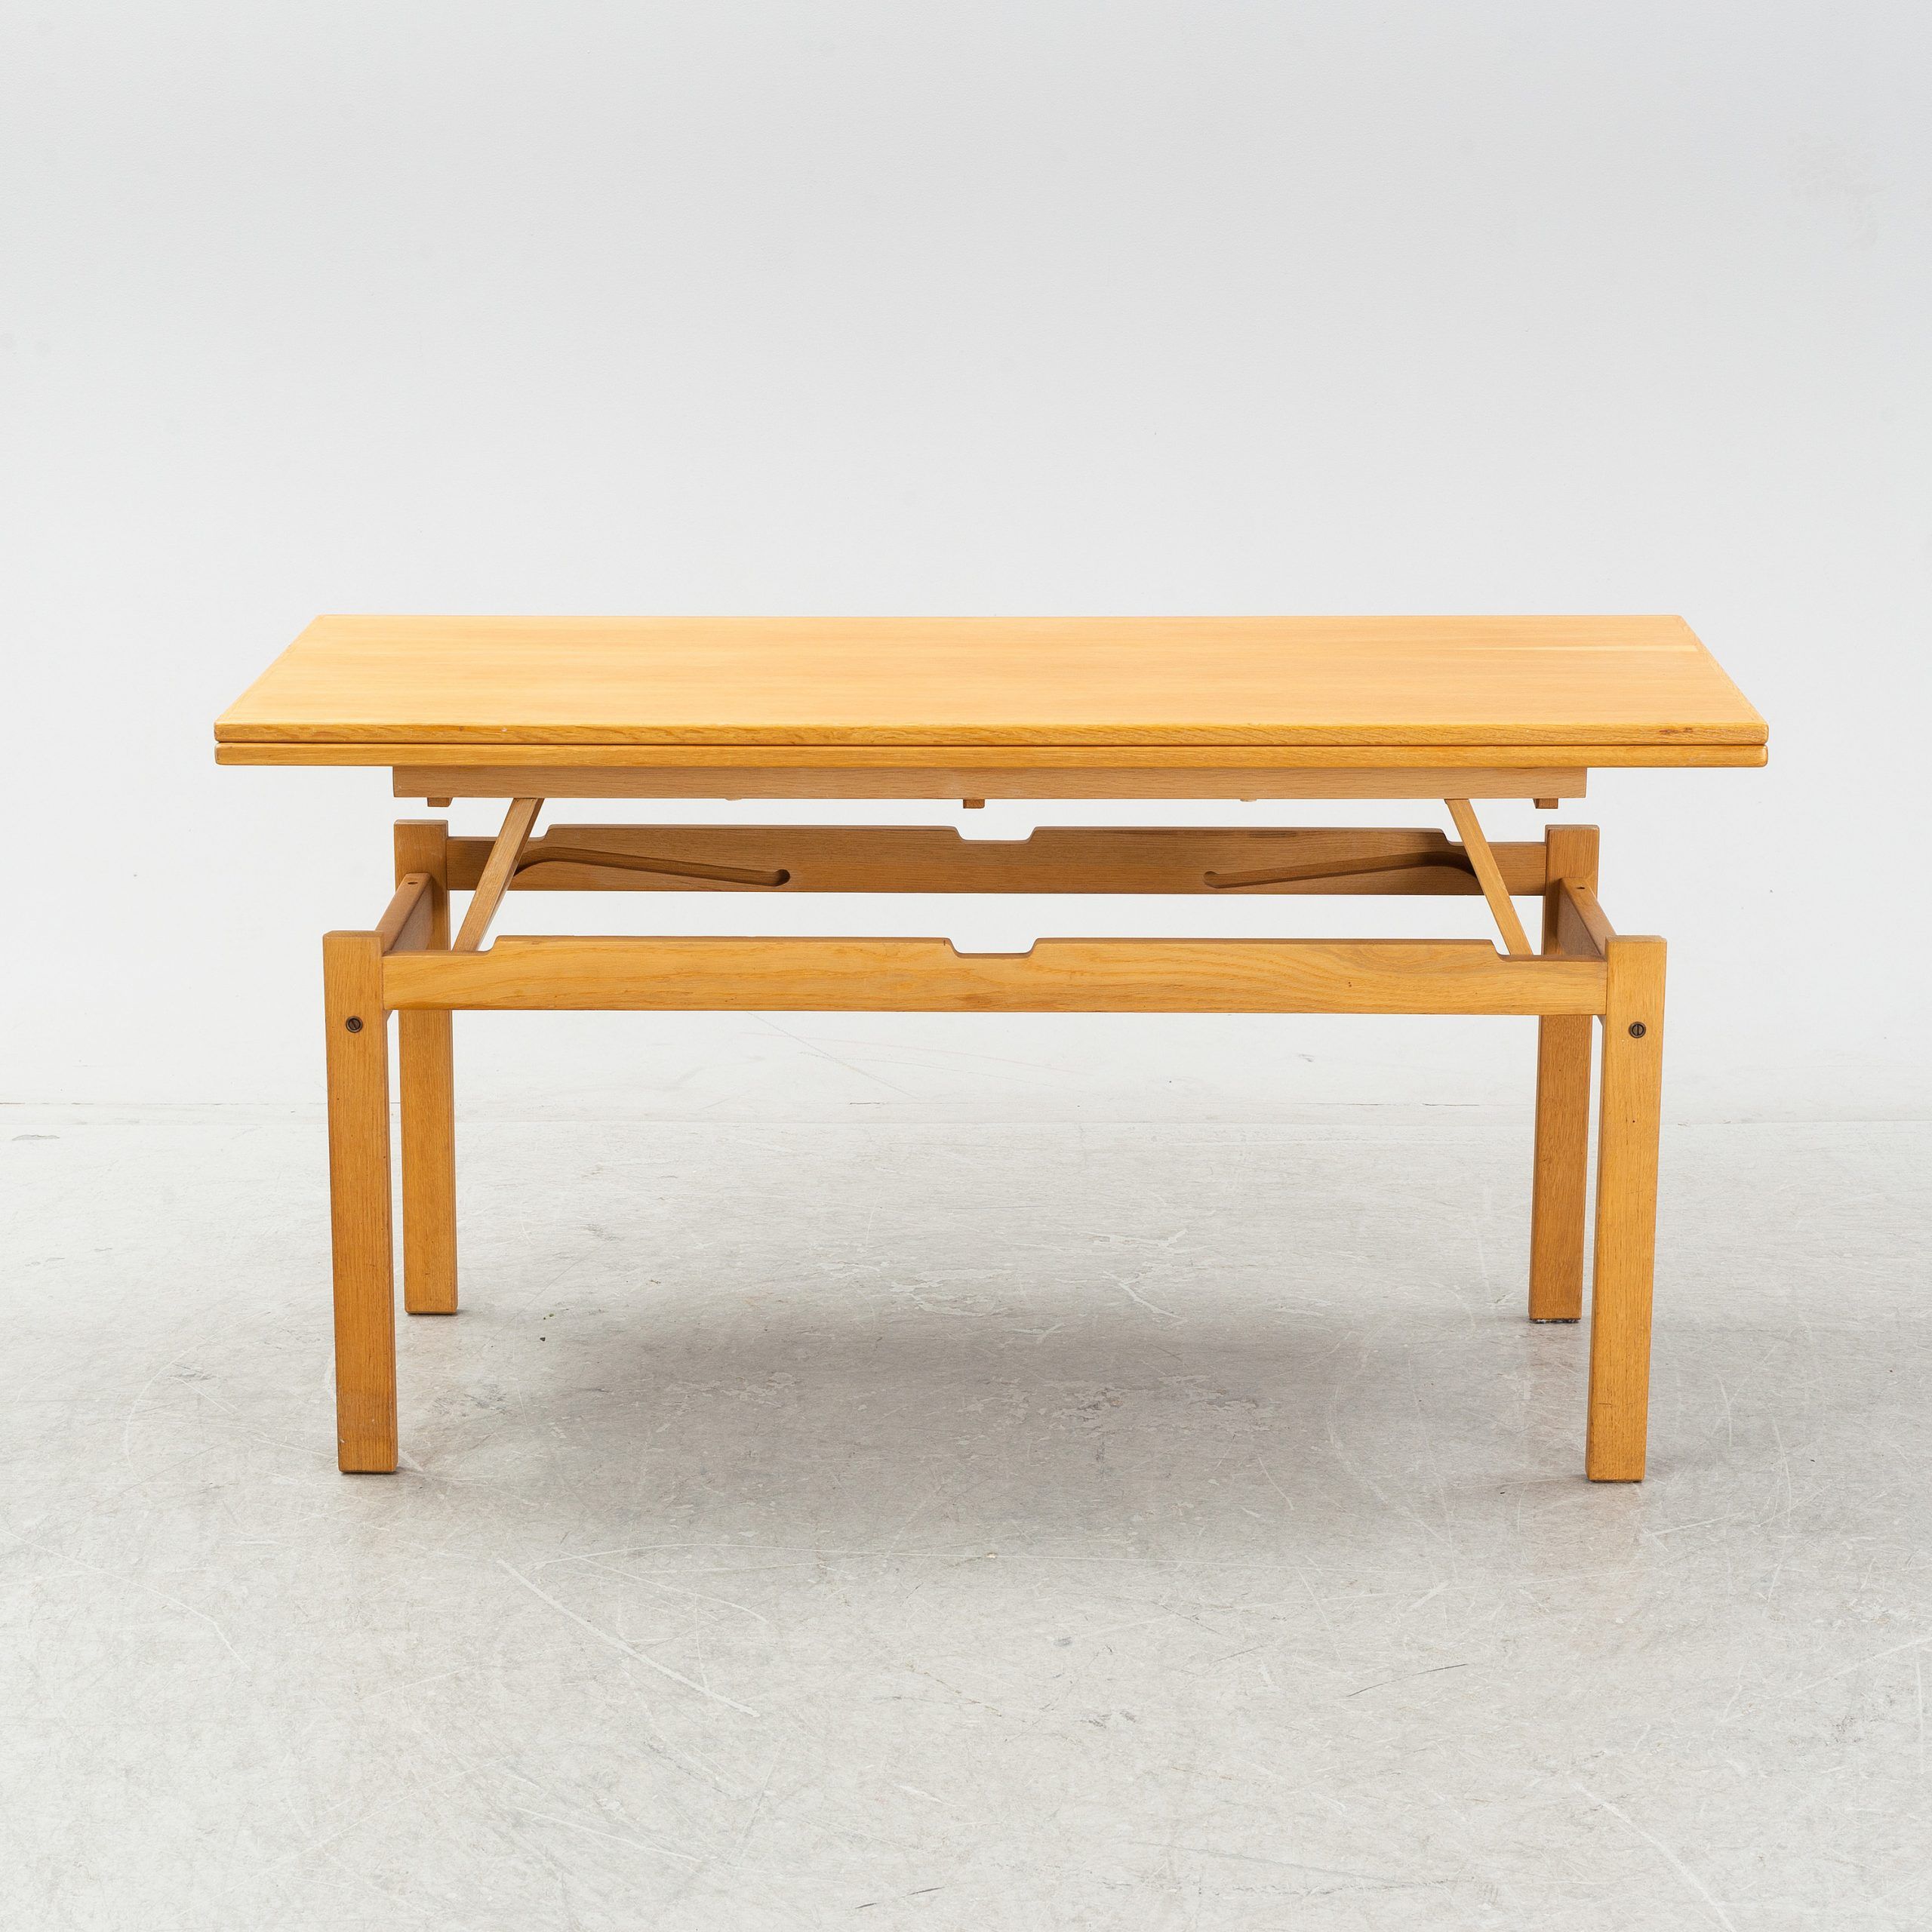 An Oak Dinner Table/coffee Table, Kombina Pt, 1960's (View 20 of 20)